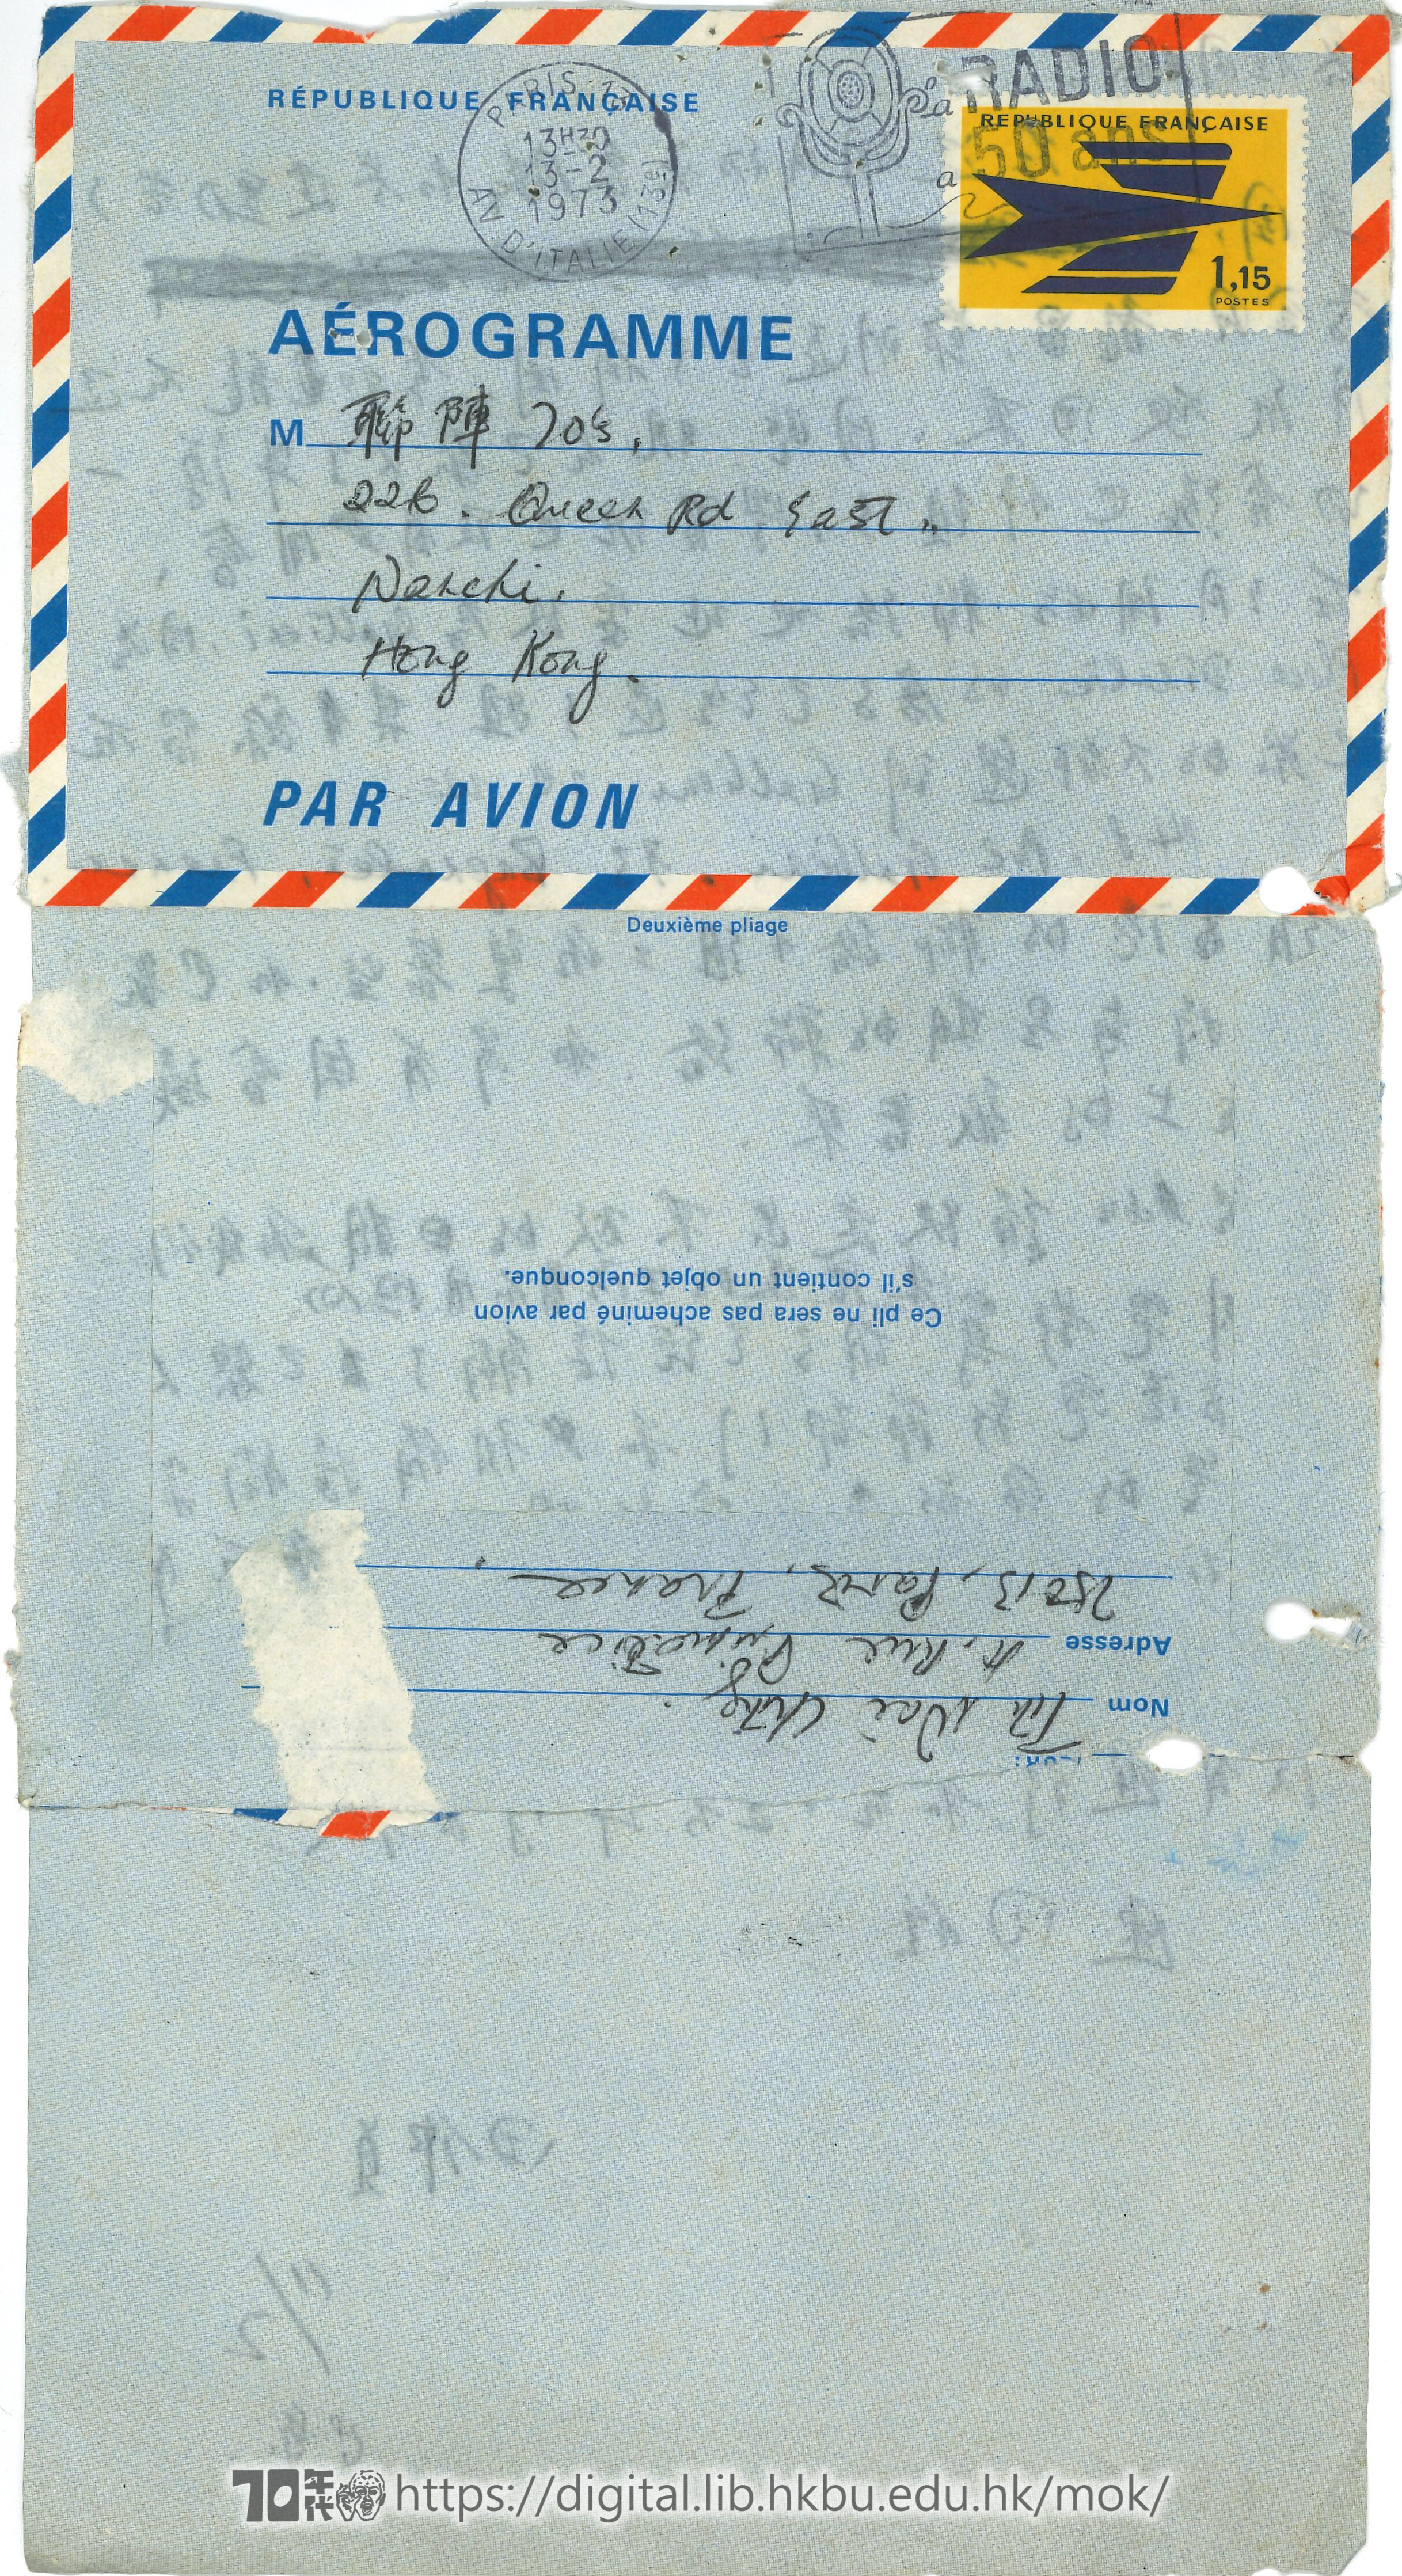   Letter from Tin Chung-ching to members of 70